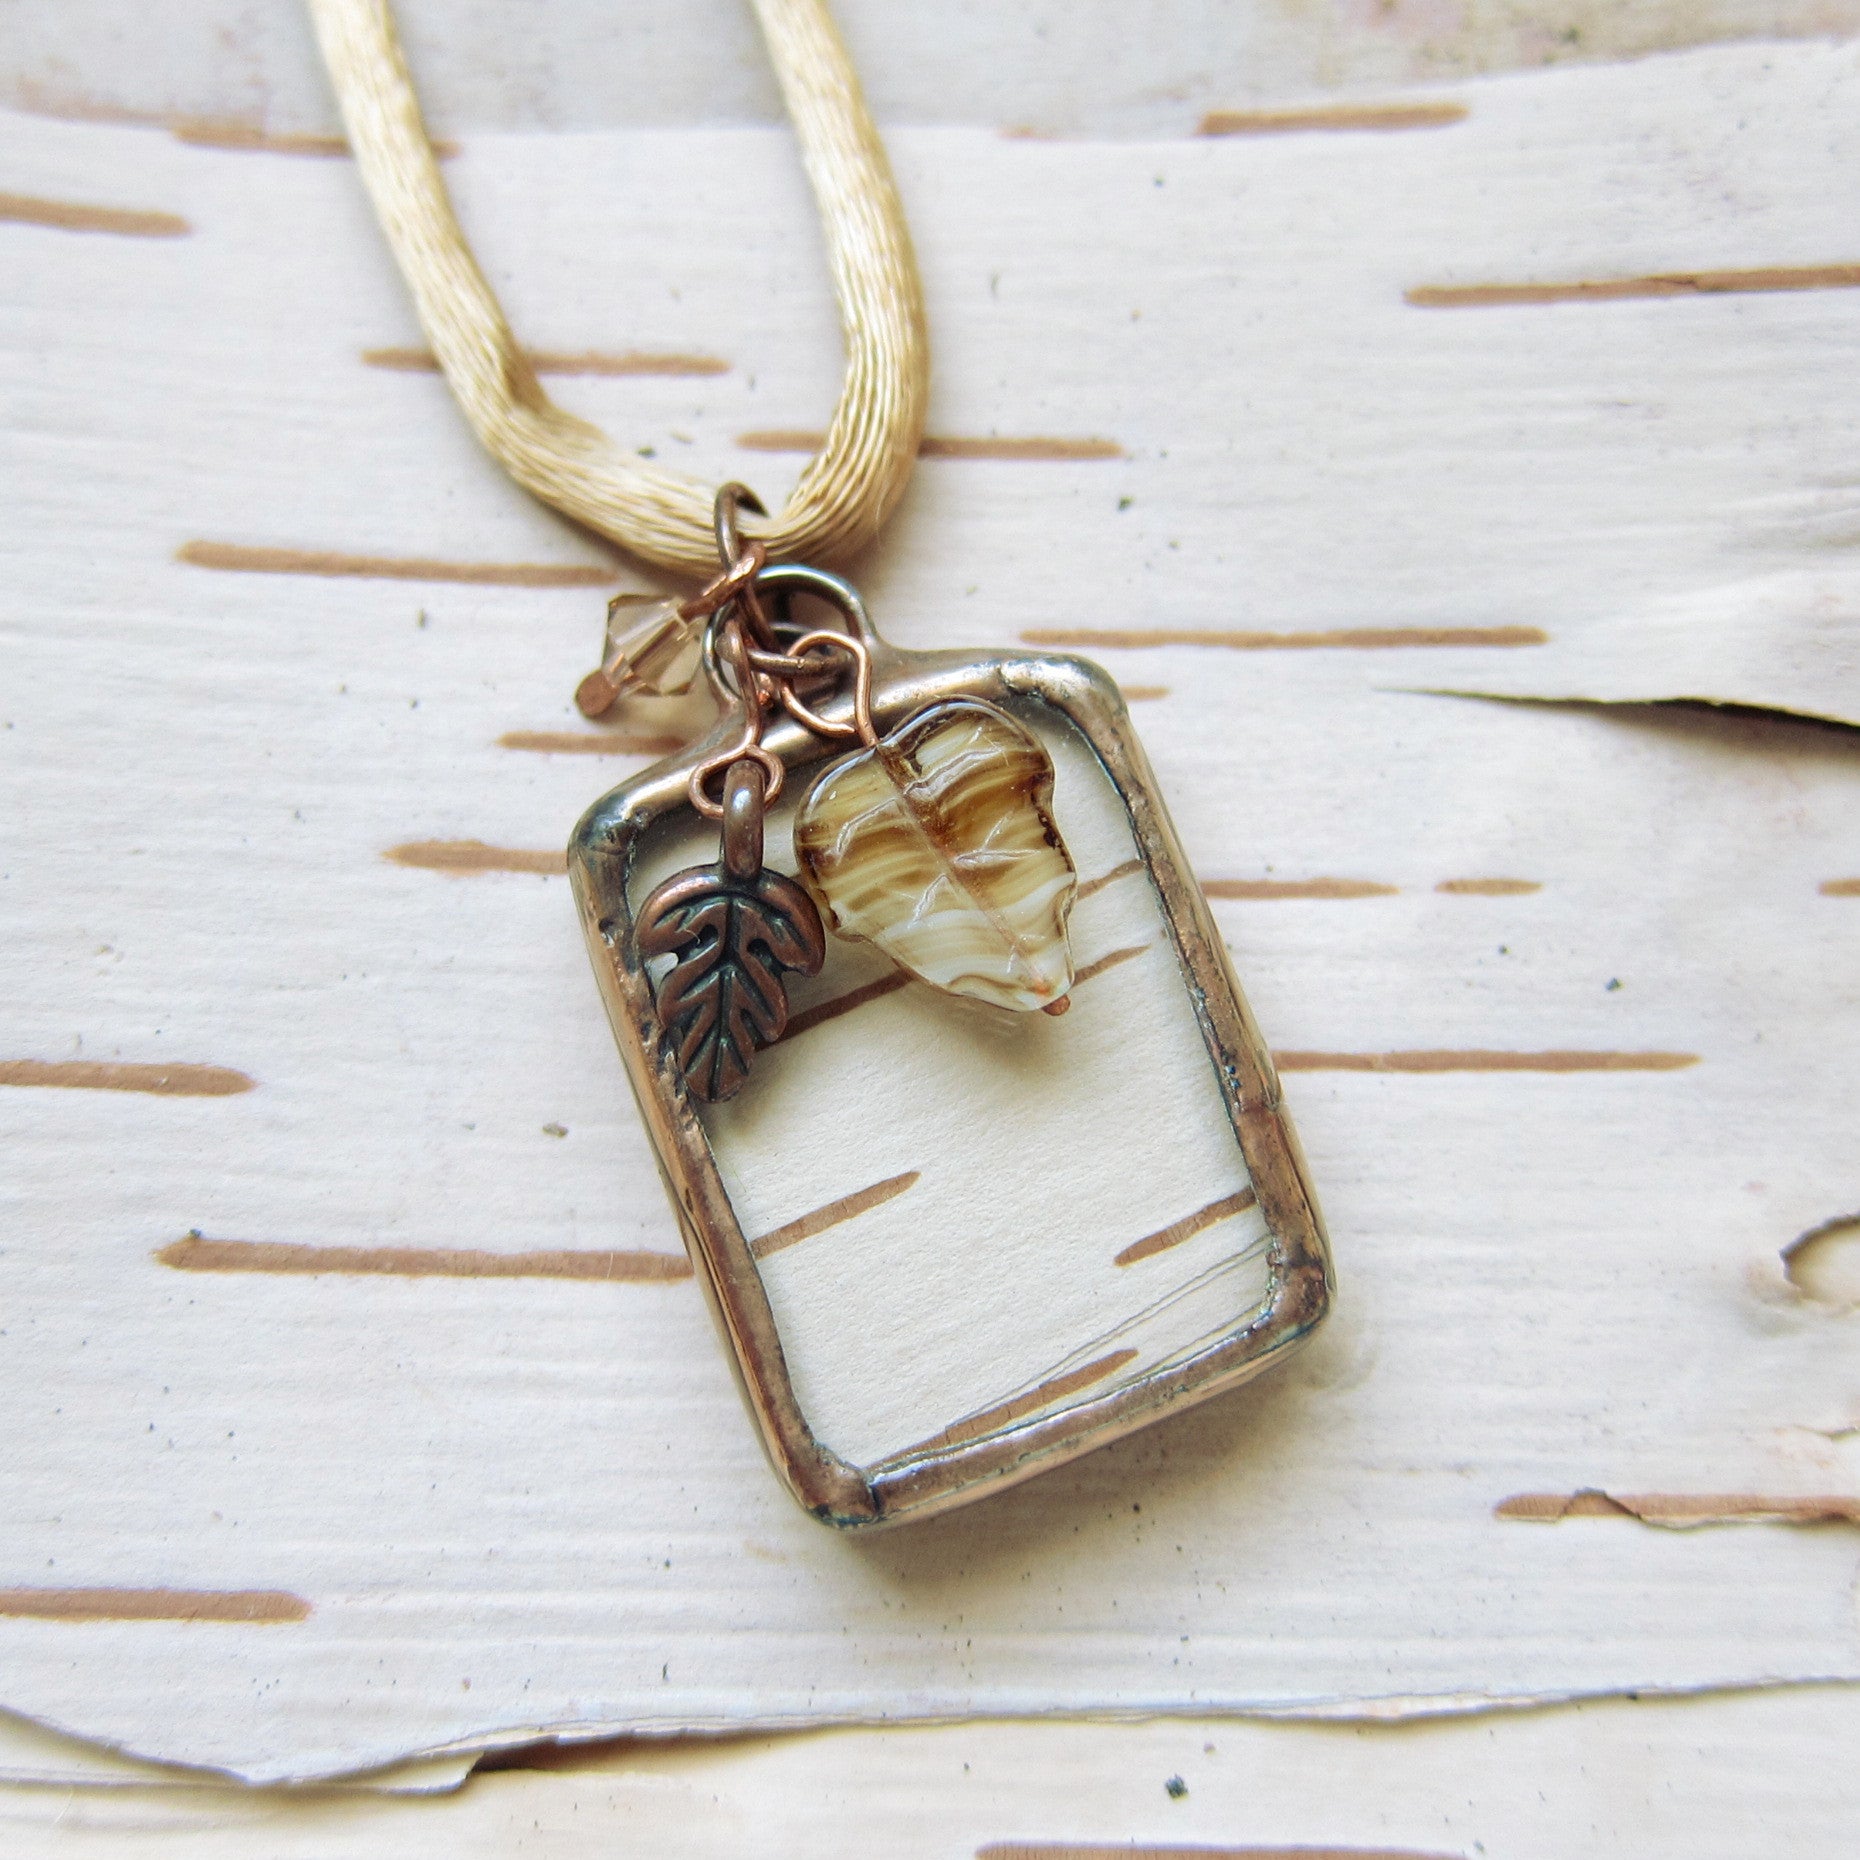 Copper birch bark stained glass pendant necklace